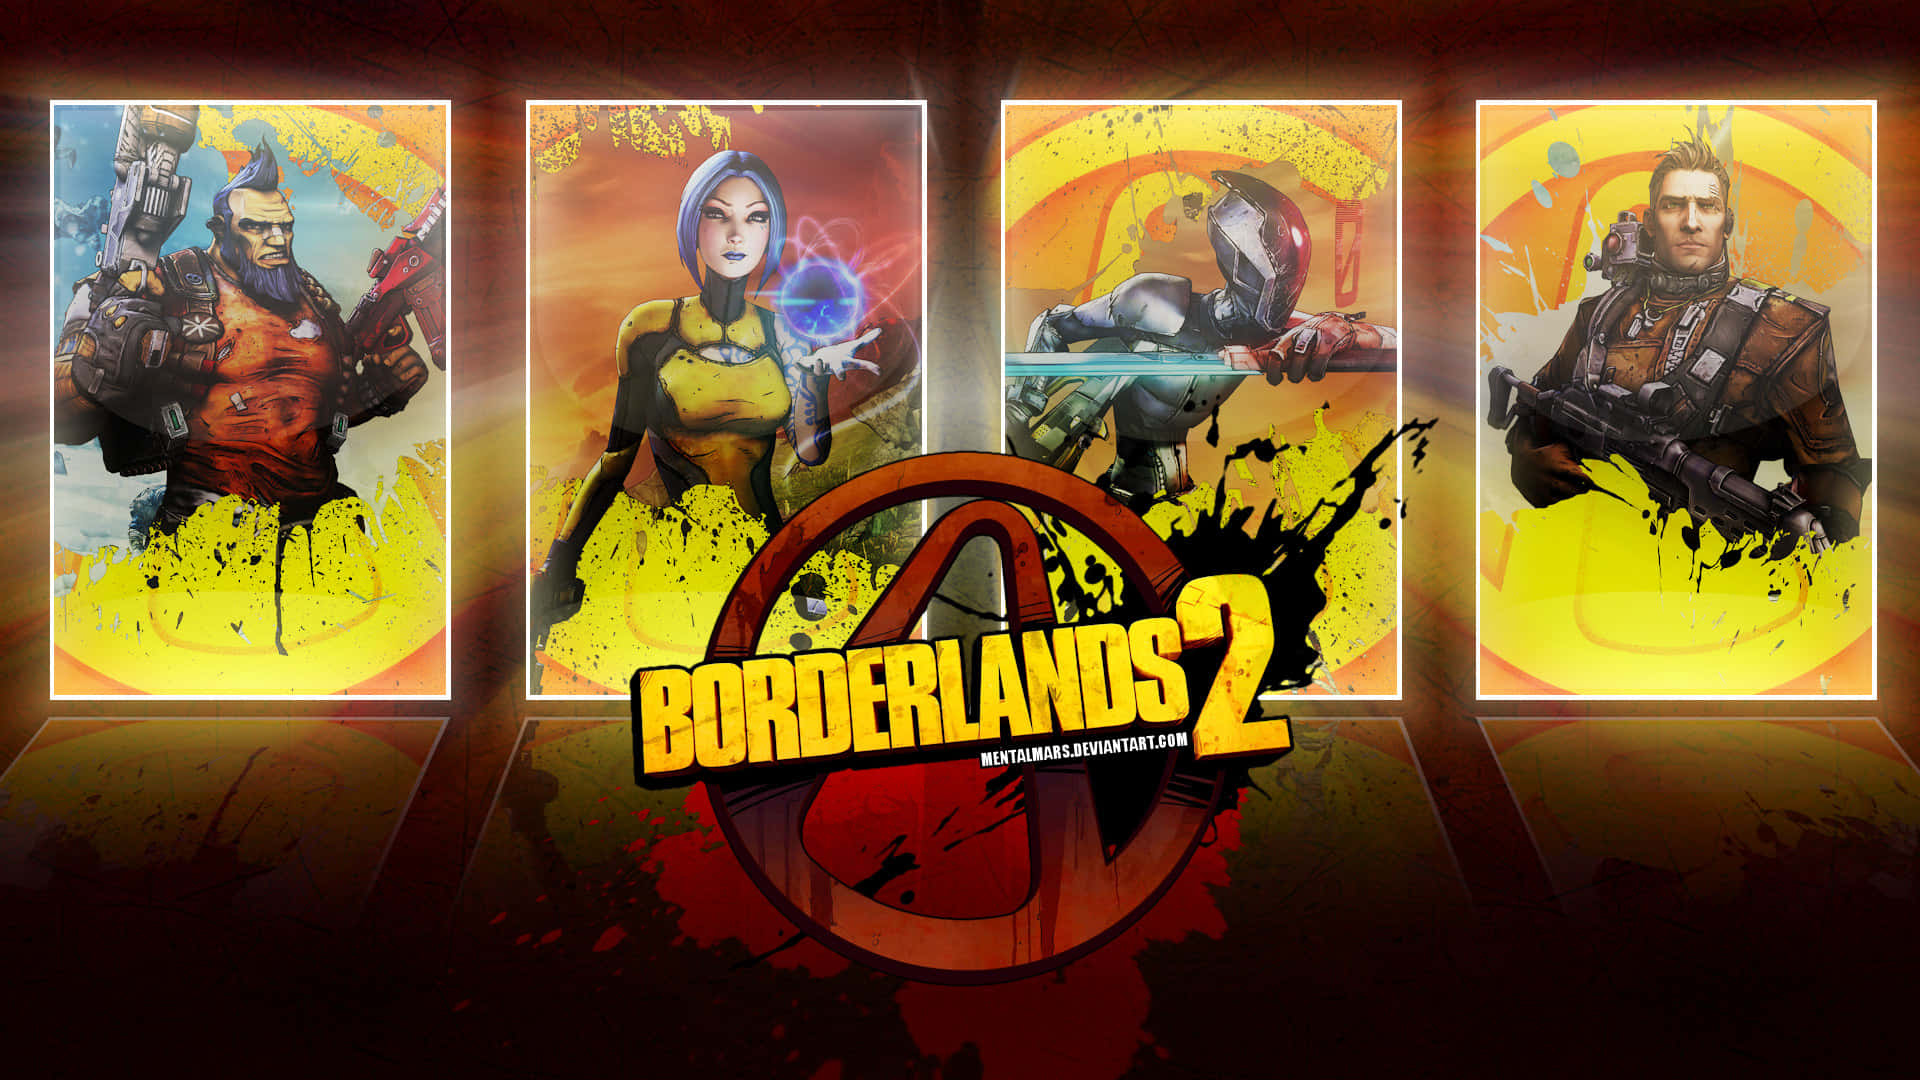 Thrilling Borderlands Adventure Awaits in the Post-Apocalyptic World